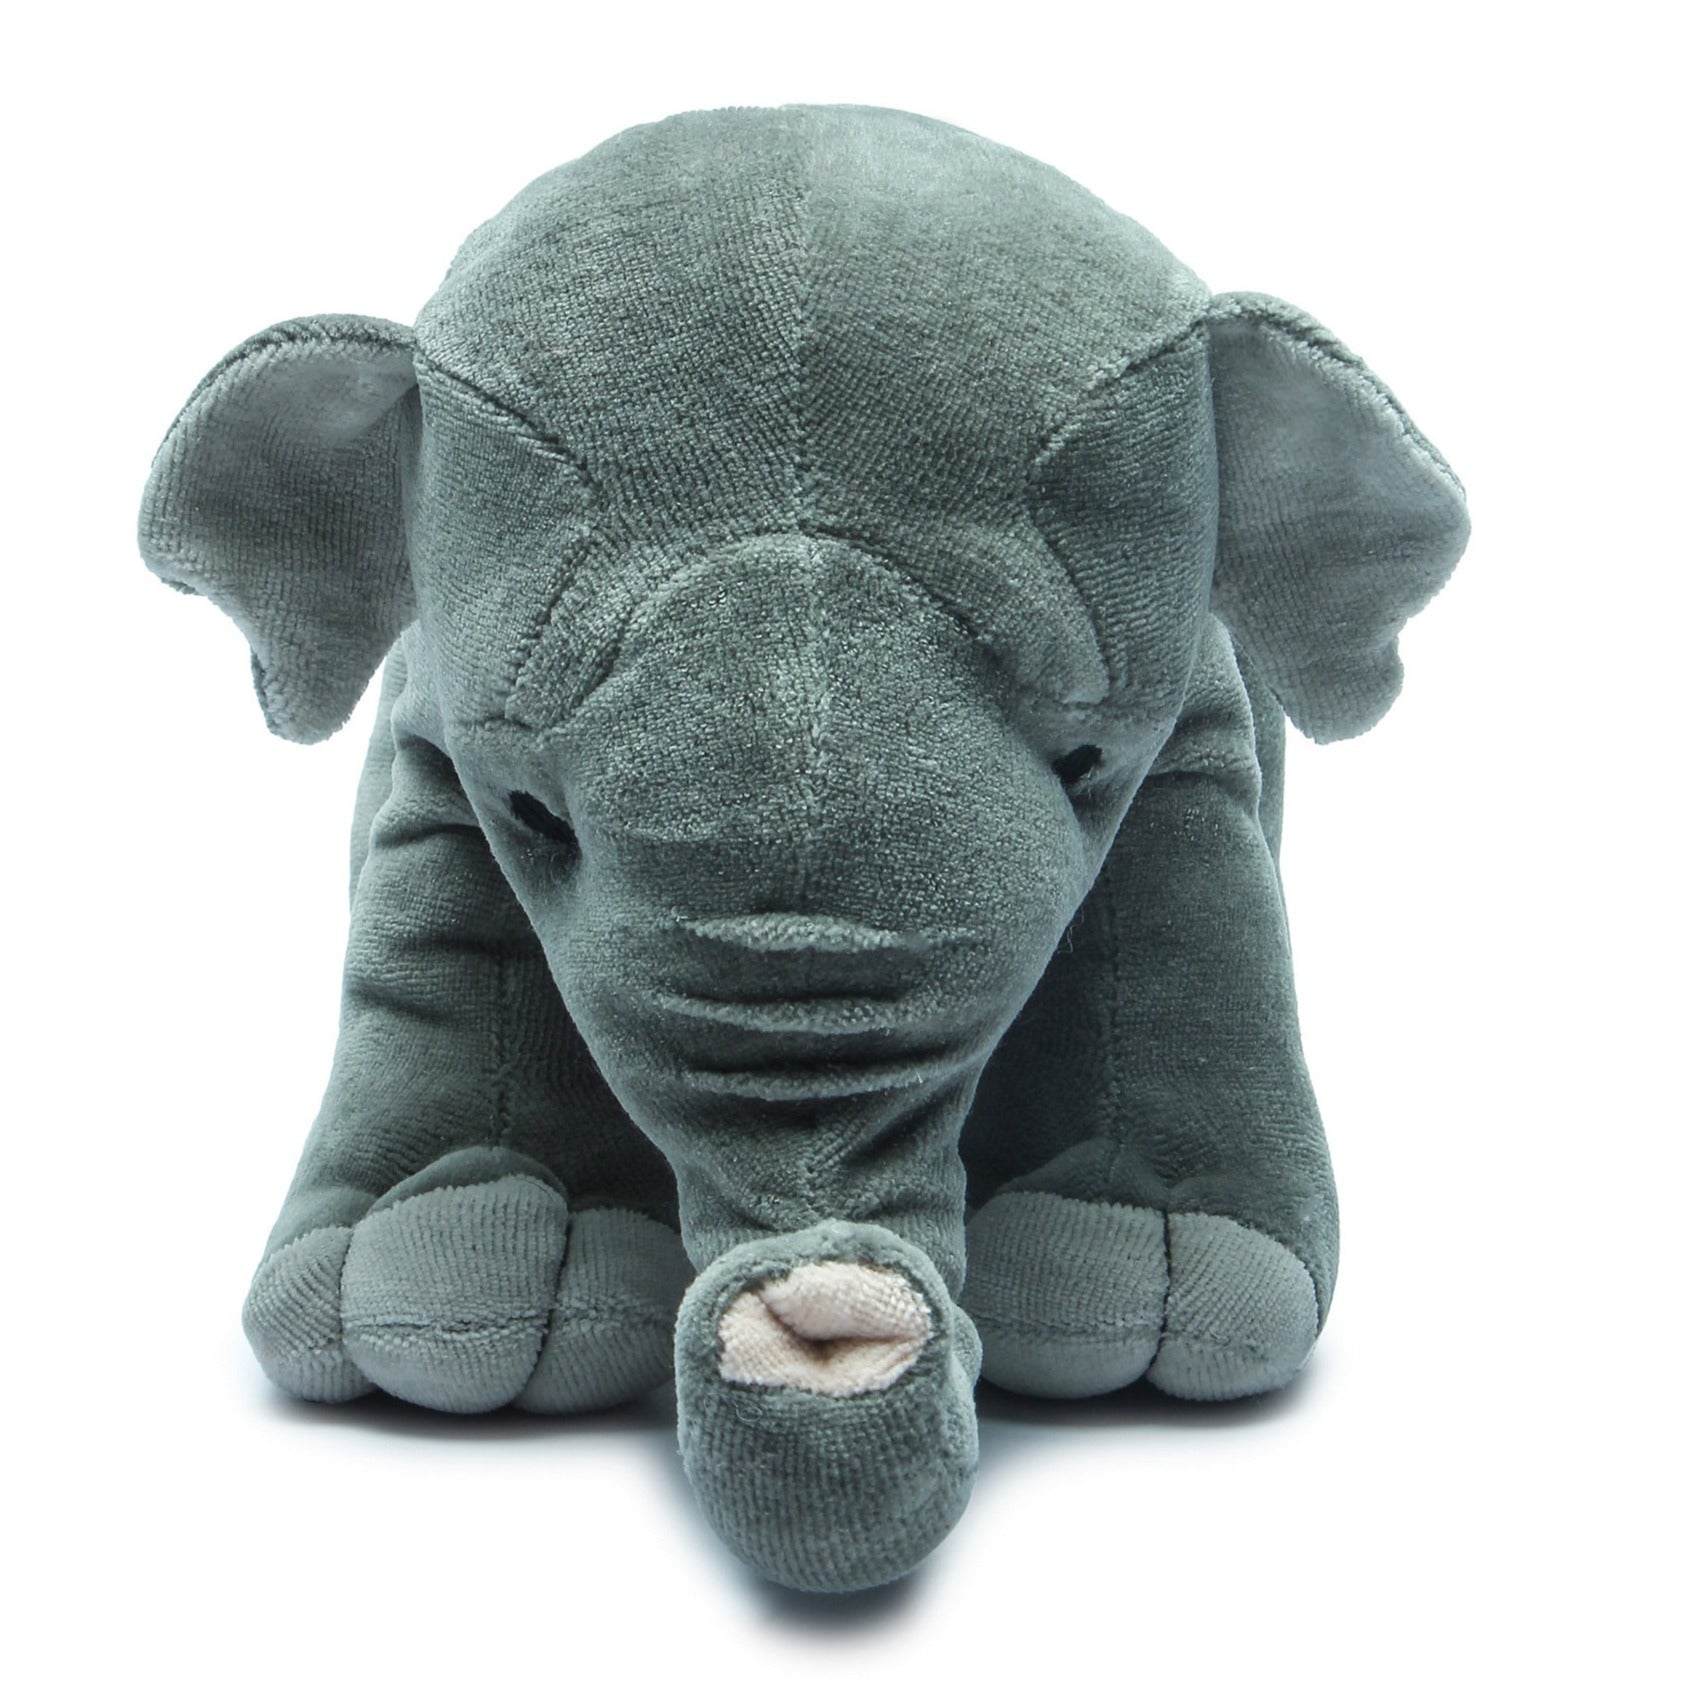 5 Reasons to Stop Buying Polyester Plush Toys Made in China